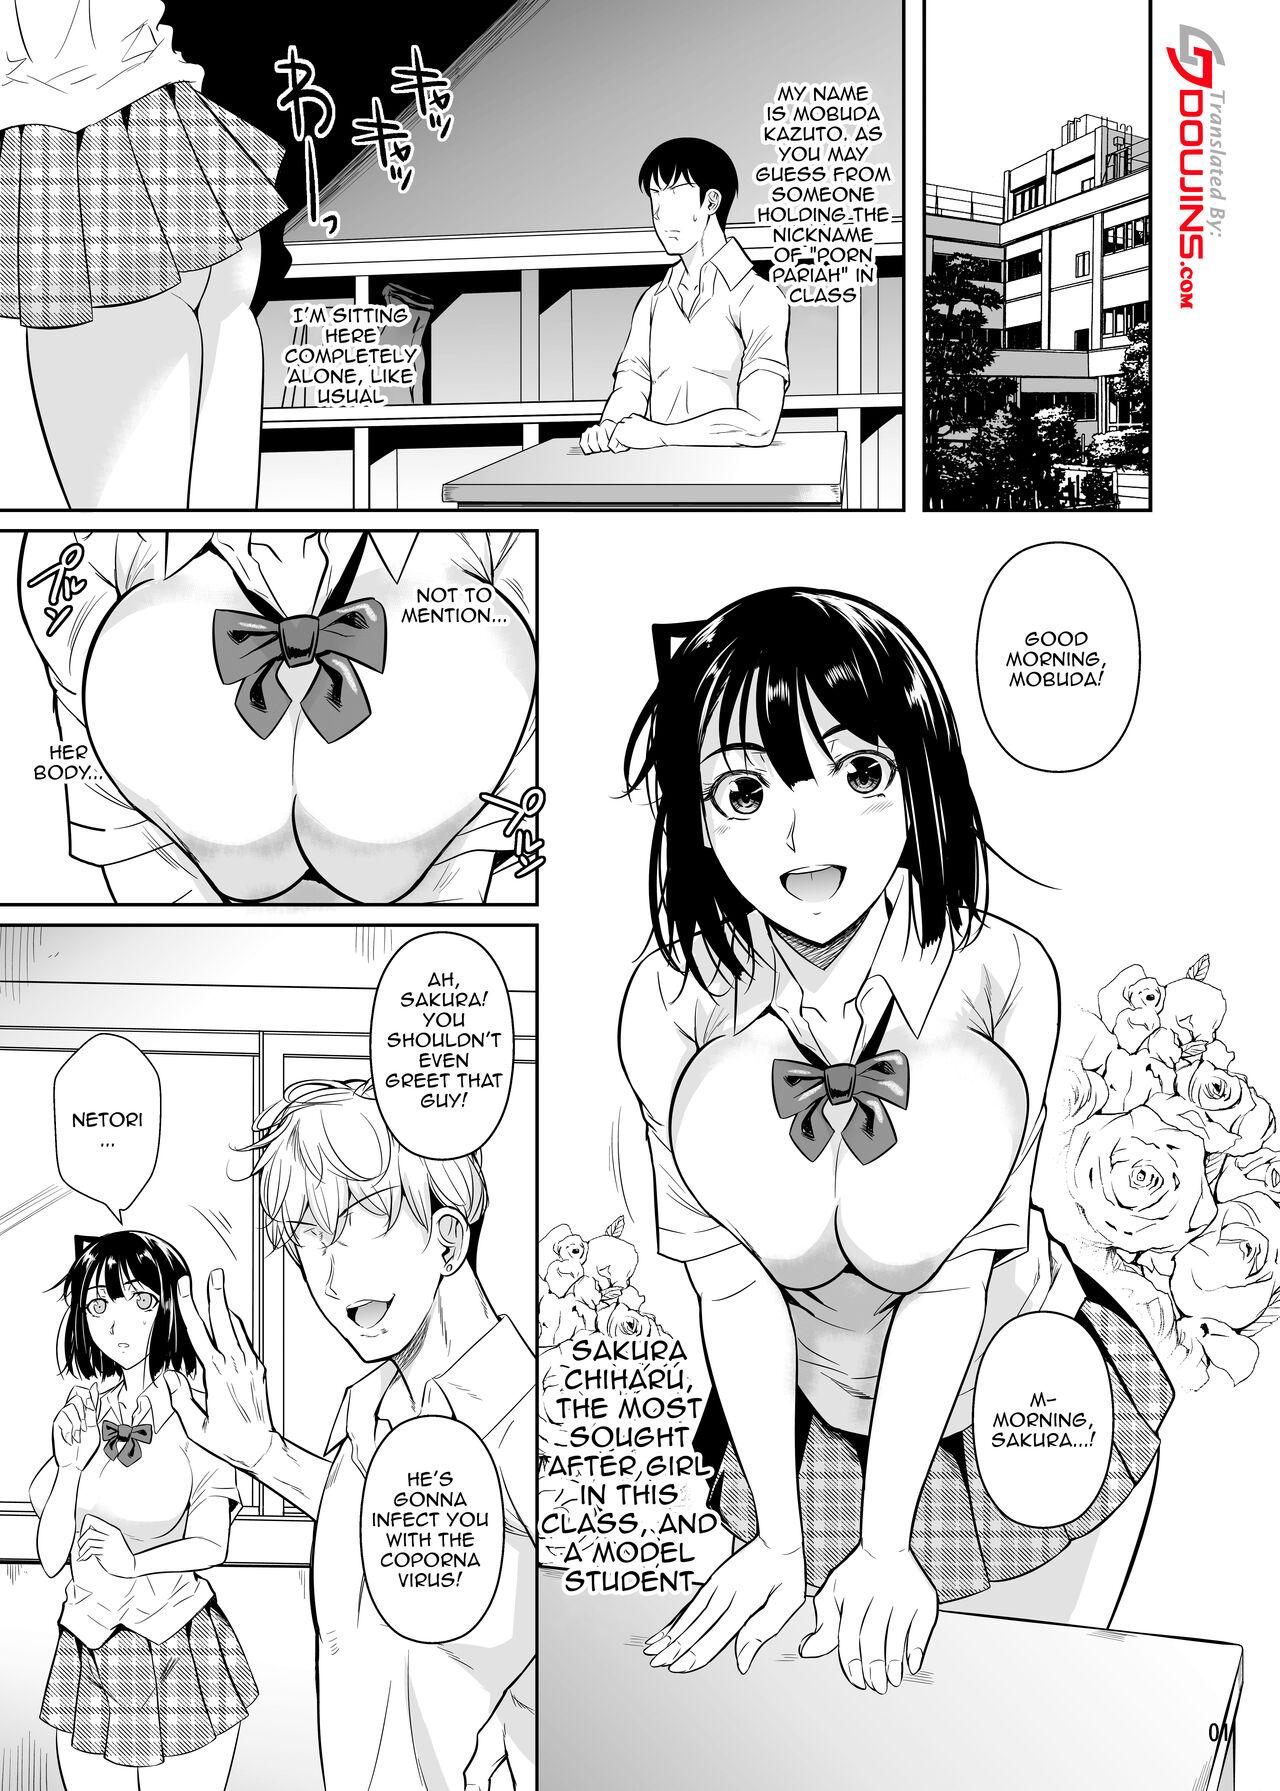 Vecina Bocchi no Mob ga Tadashii Sentaku o Shite Seiso Shoujo to Tsukiau. 2 Mochiron Sex mo Suru | A Loner Makes the Right Choices And Goes Out With a Seiso Girl. Of Course There's Sex As Well 2 - Original Foreskin - Picture 2